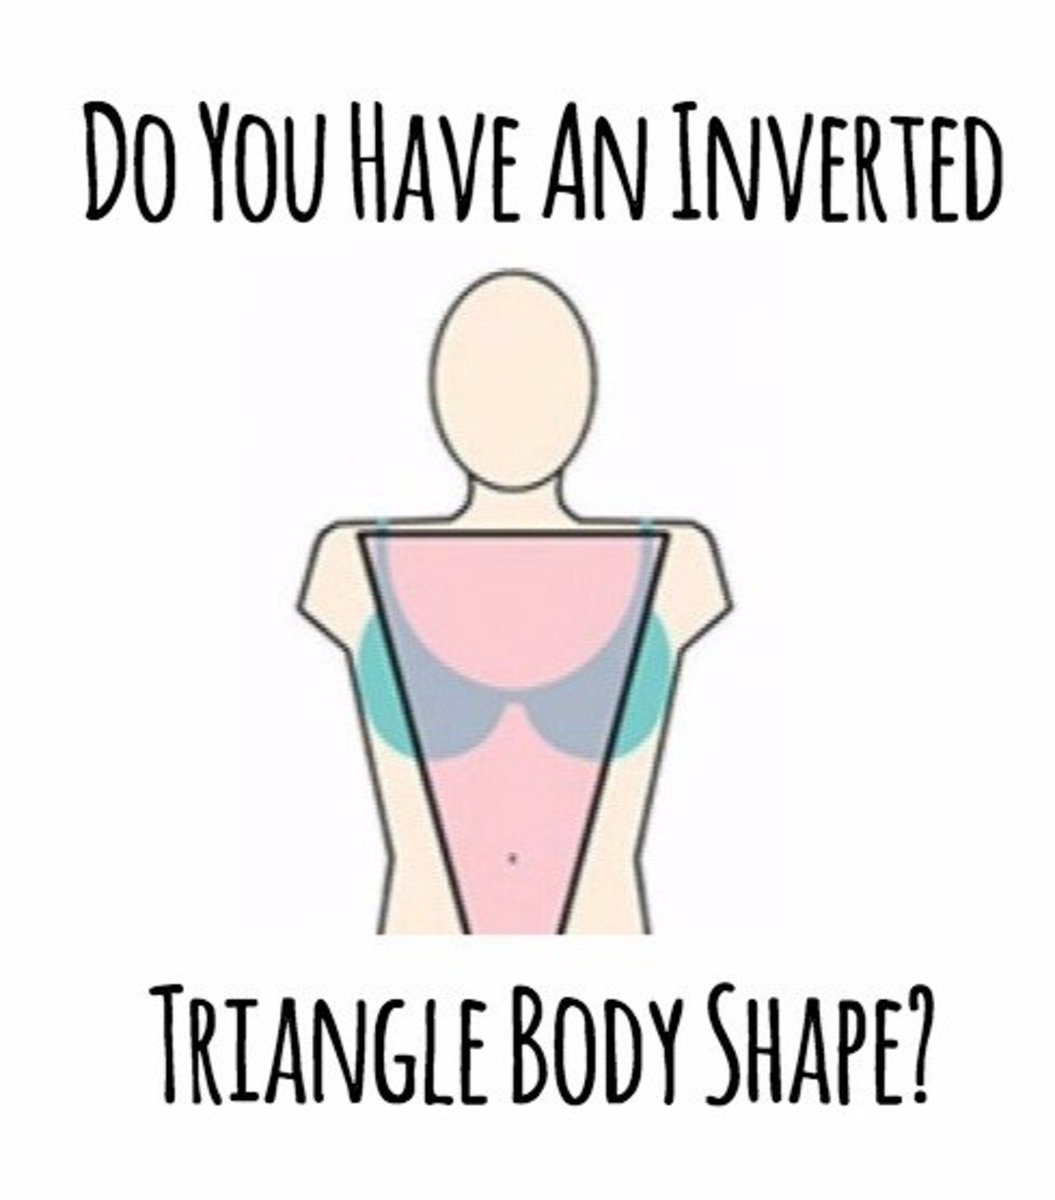 do-you-have-an-inverted-triangle-body-shape